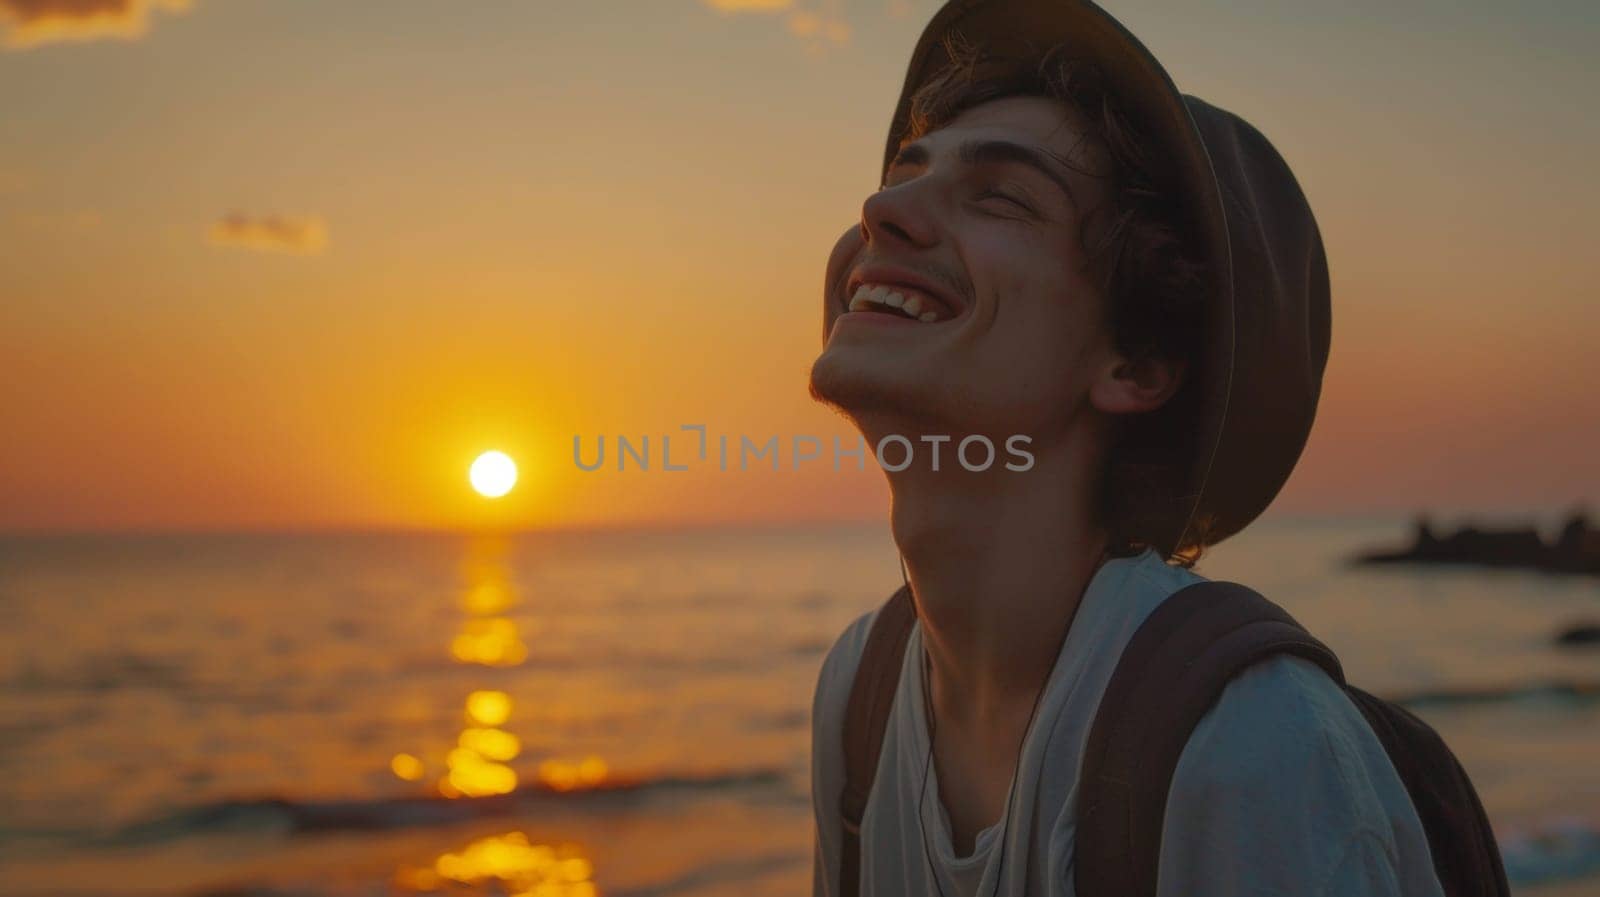 A man with a hat on smiling at the sun